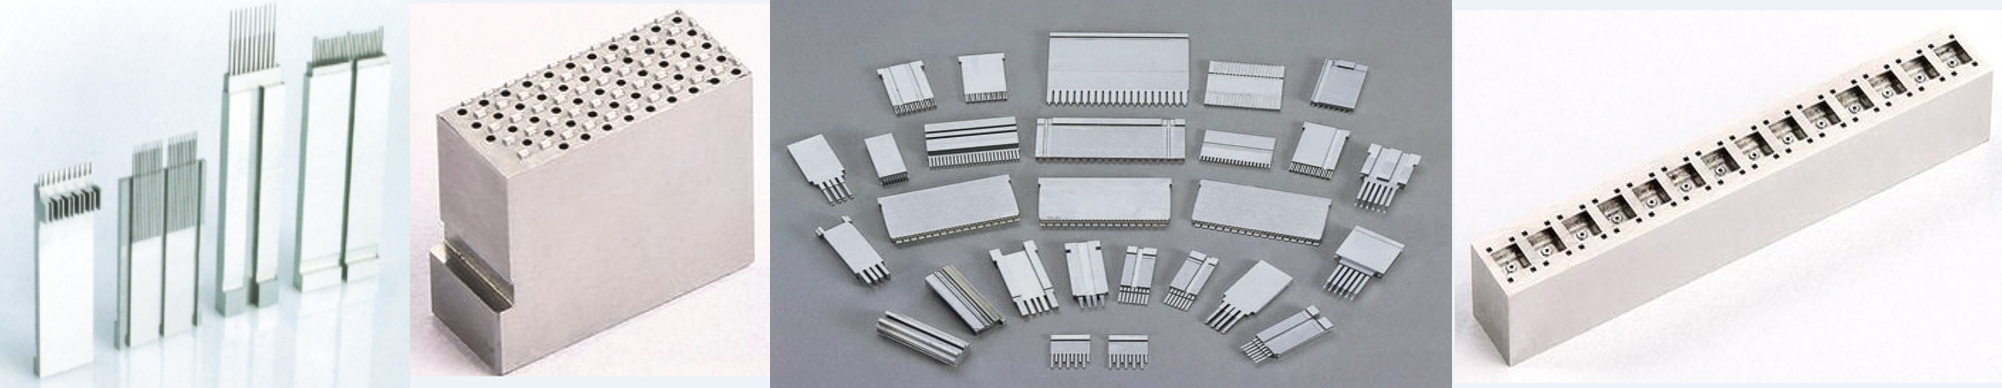 Plastic Injection Molding Tooling Insert